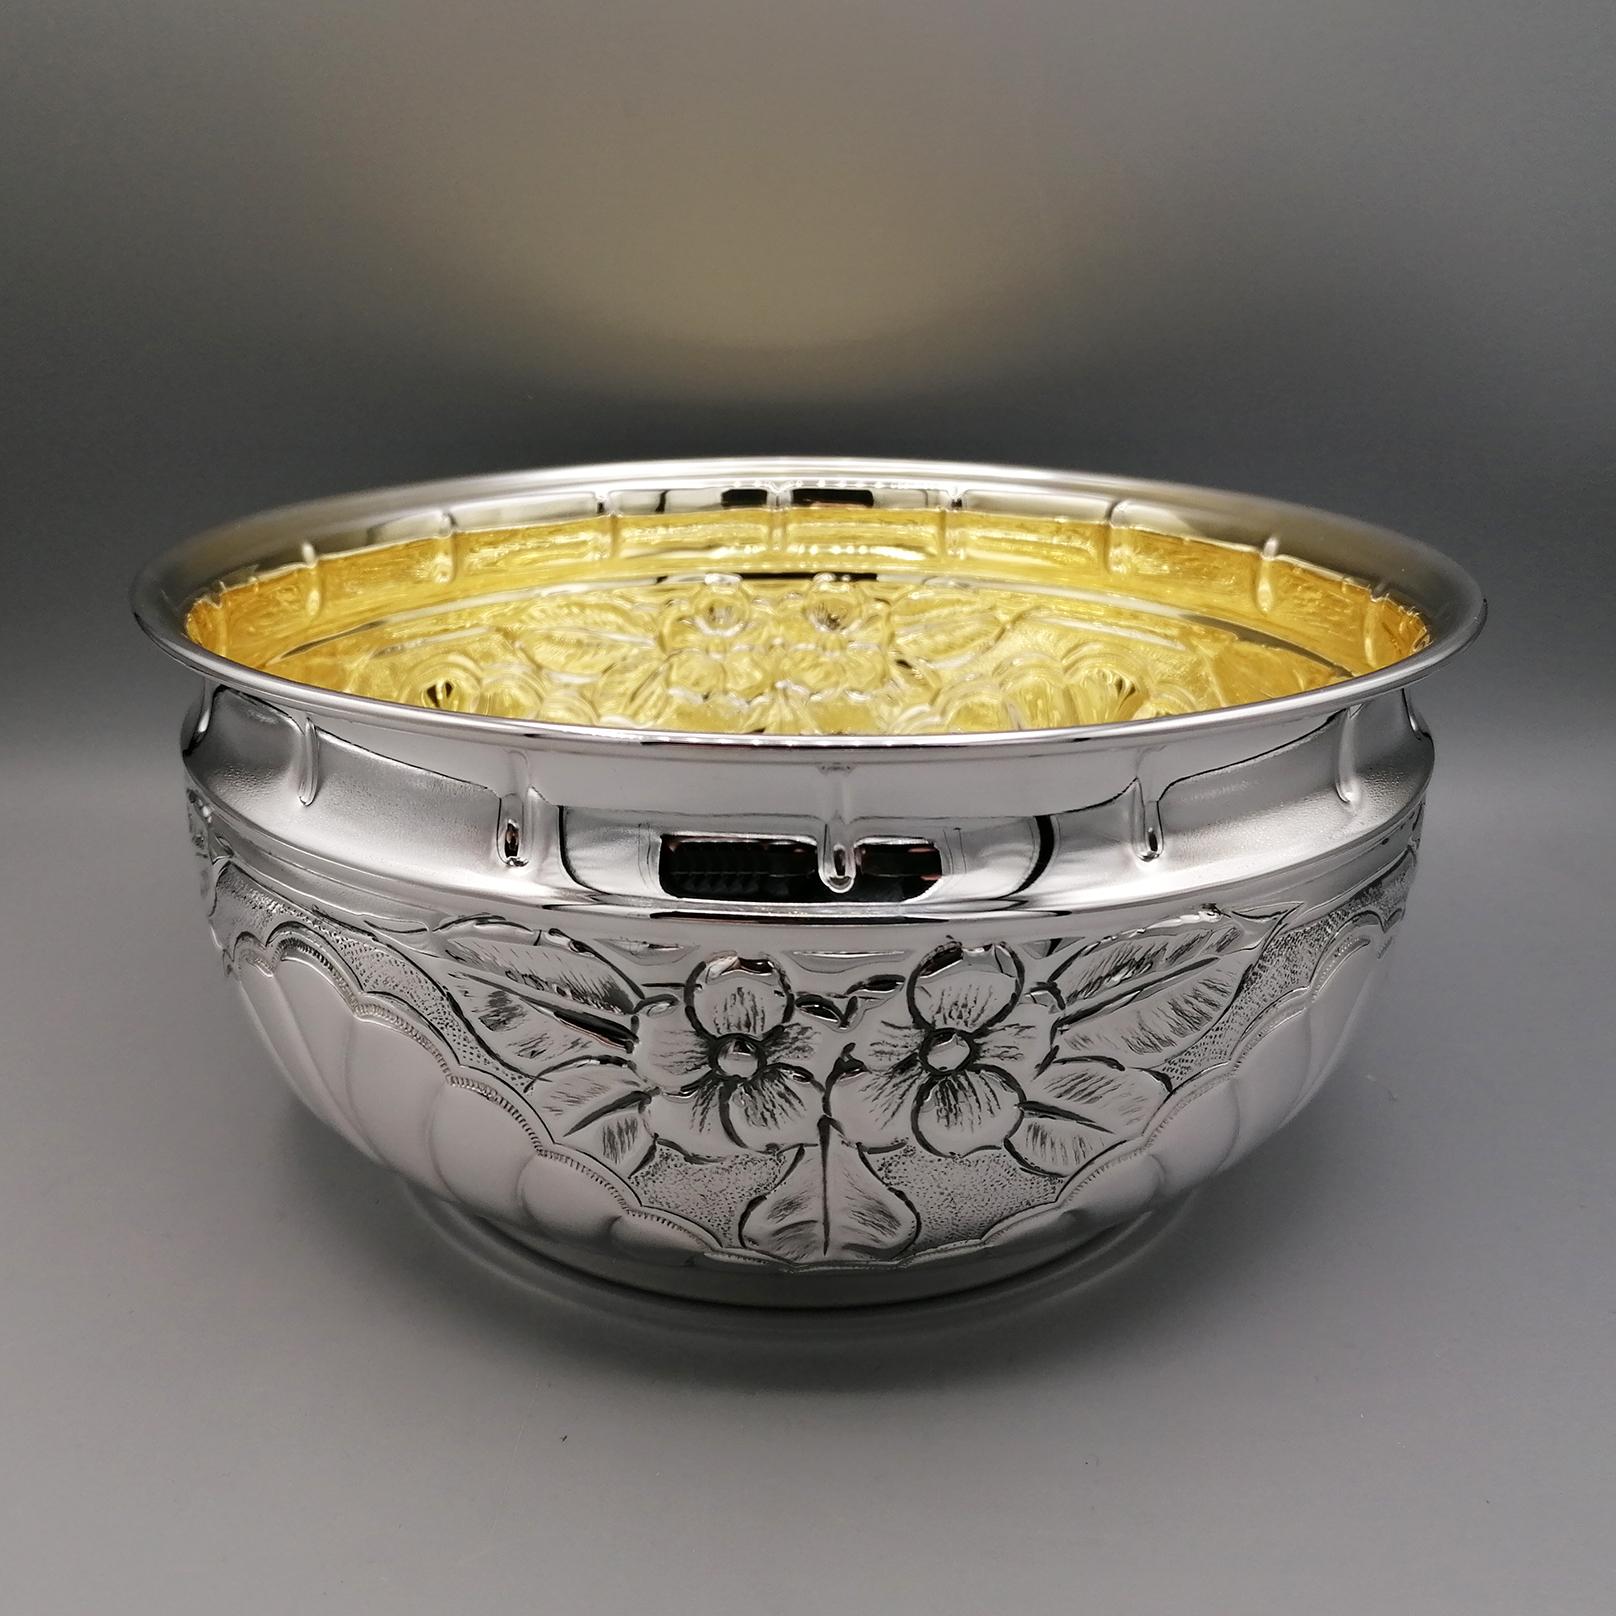 Centerpiece bowl in 800 solid silver.
The bowl is round and pot-bellied with only a groove in the upper part. Embossments and chisels have been executed all over the body.
Curved lines interspersed with flowers and leaves have been chiseled.
A